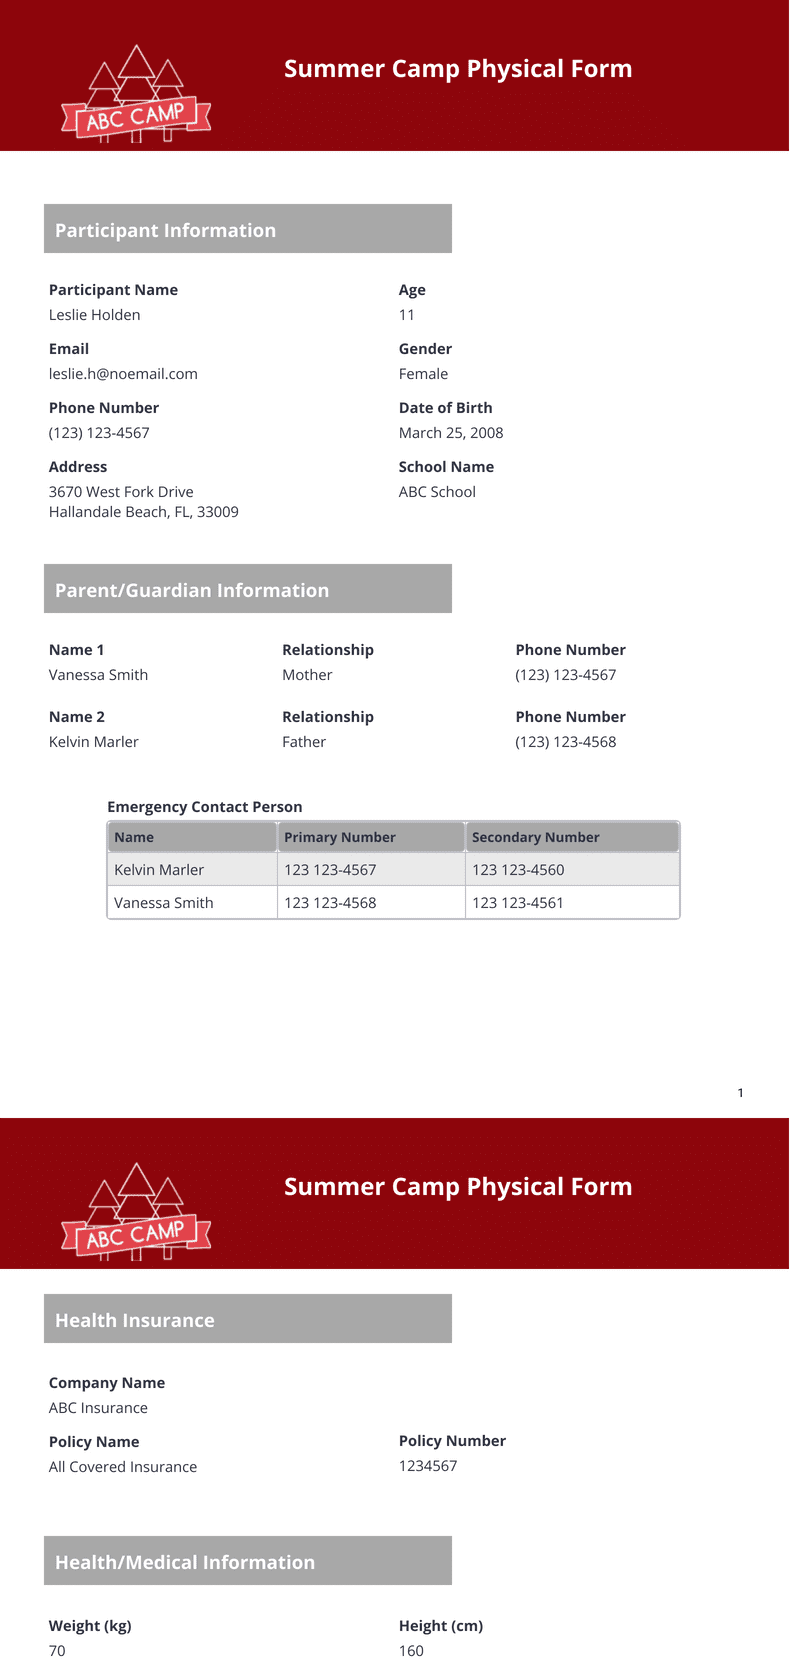 Summer Camp Physical Form